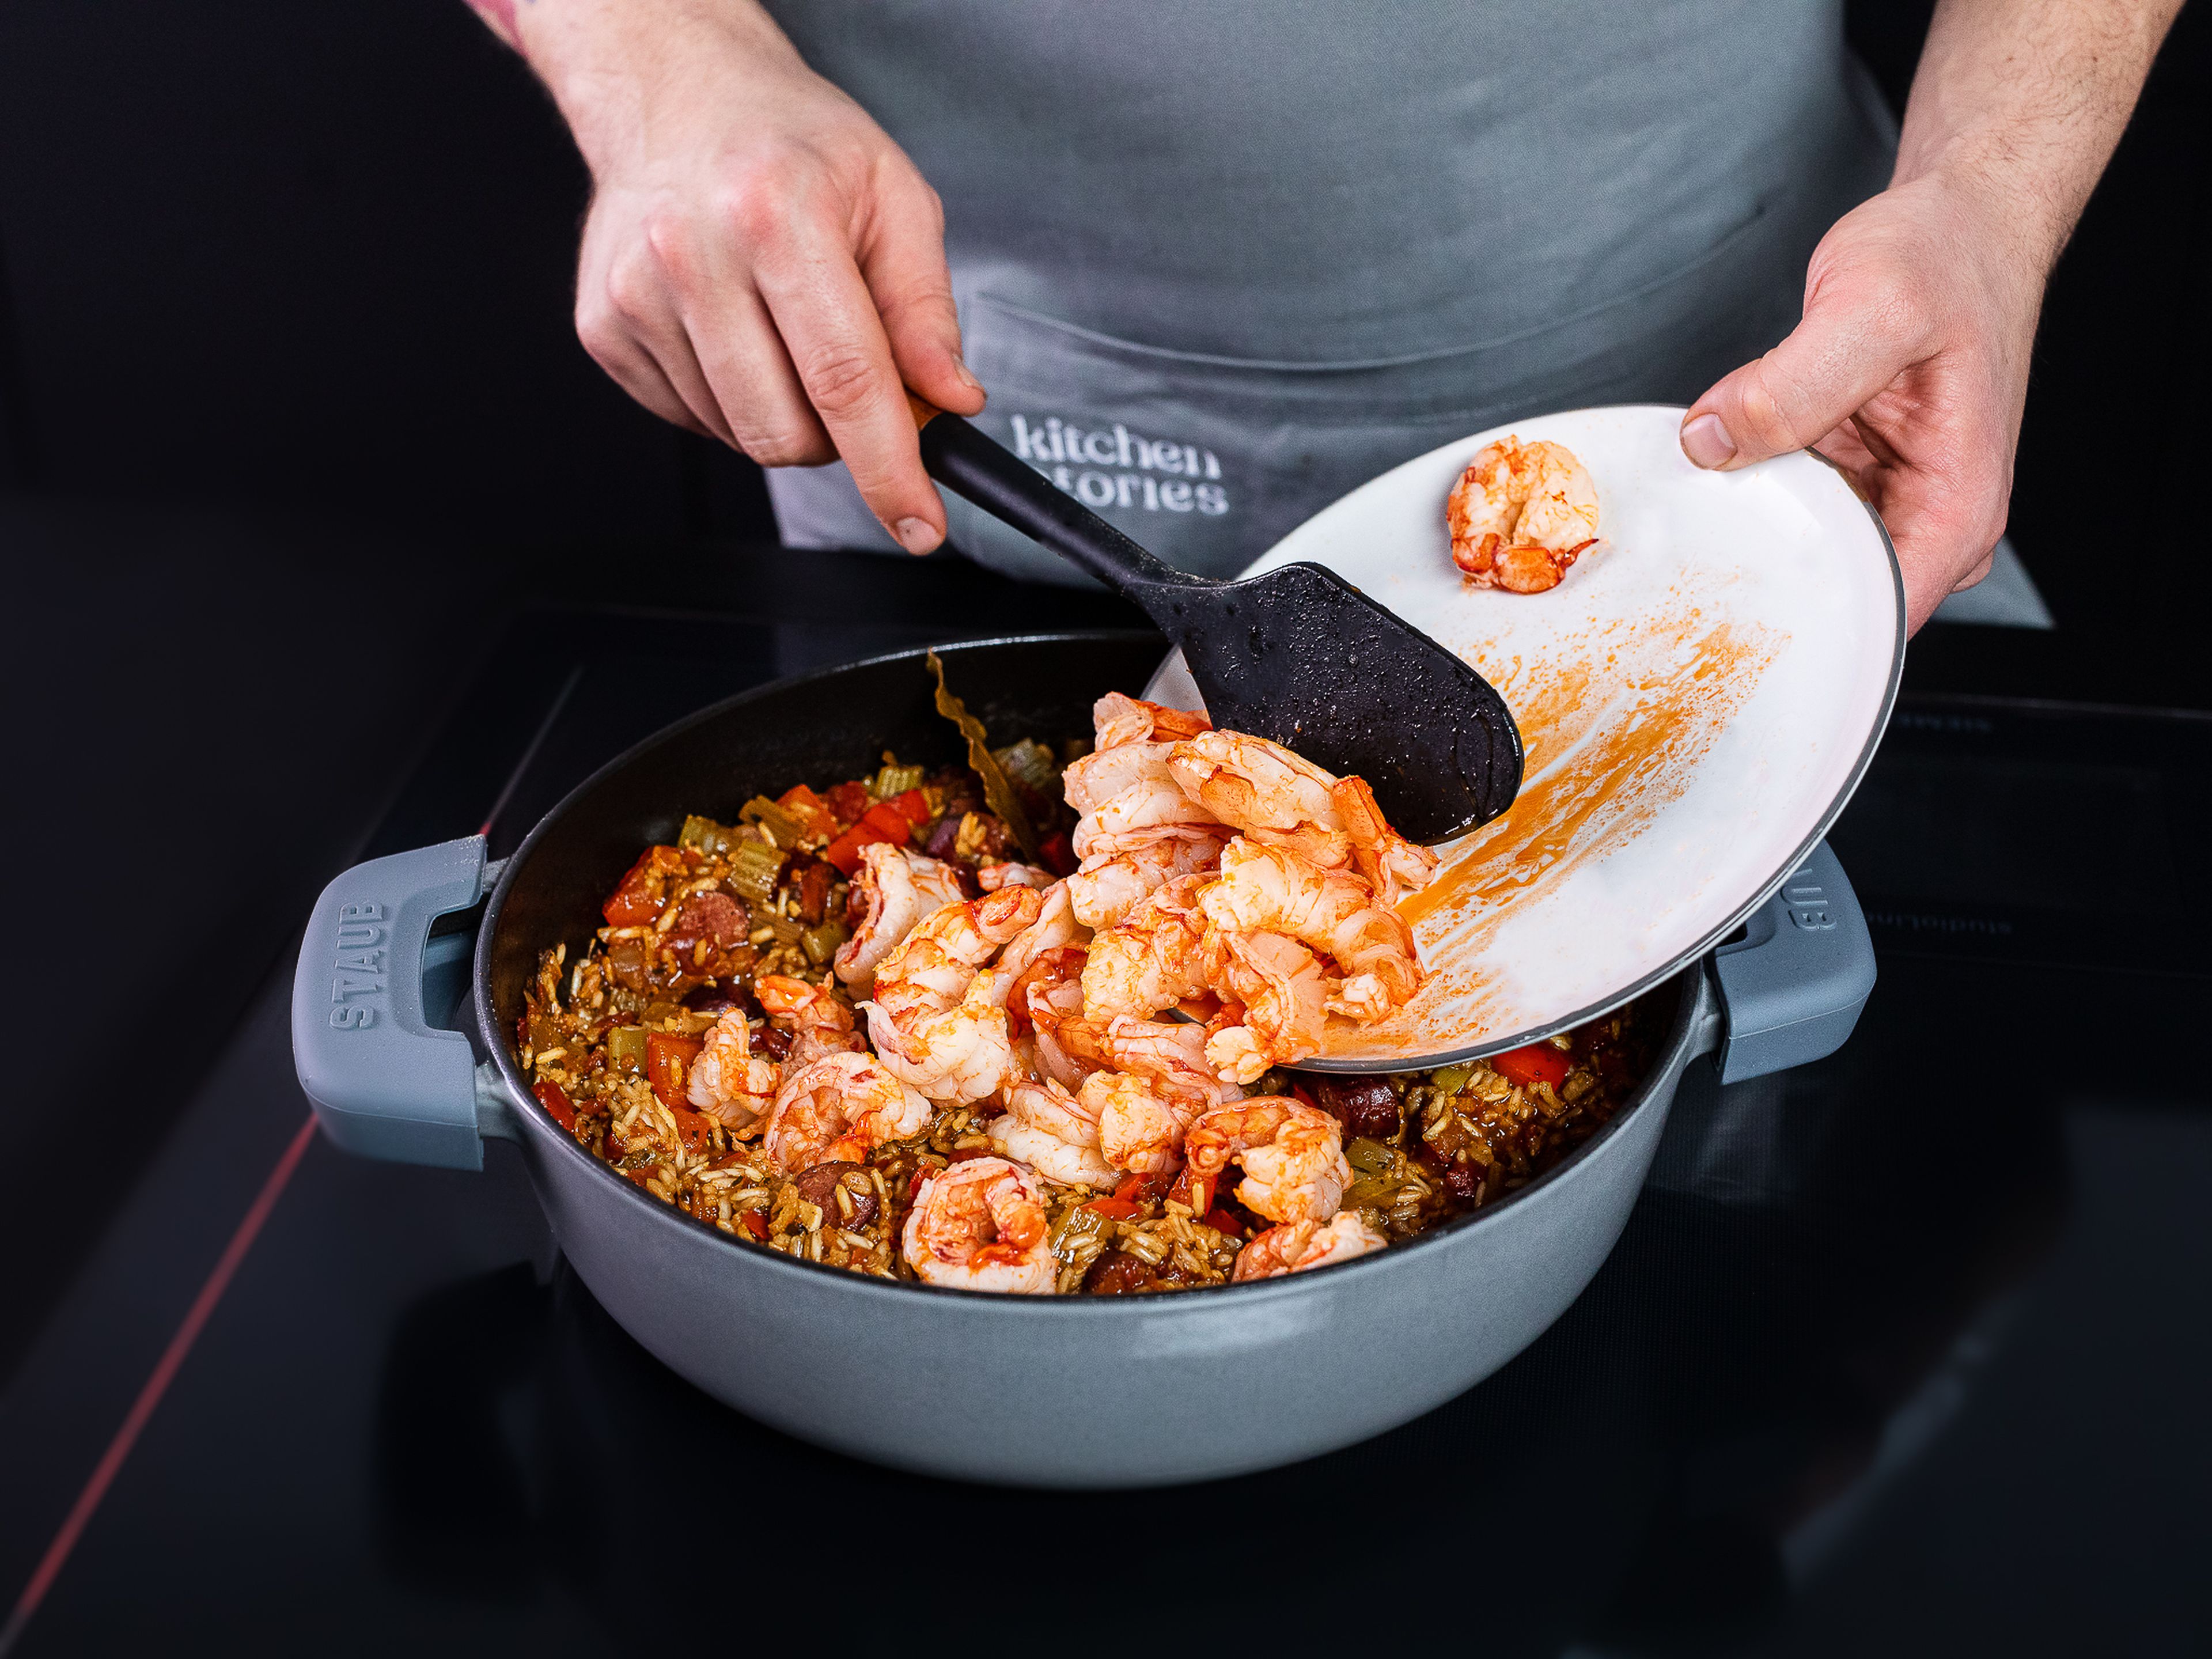 Just before the rice is done, add shrimps back to the frying pan, stir to combine, and simmer for approx. 2 min. Serve jambalaya with rice and garnish with scallions. Enjoy!